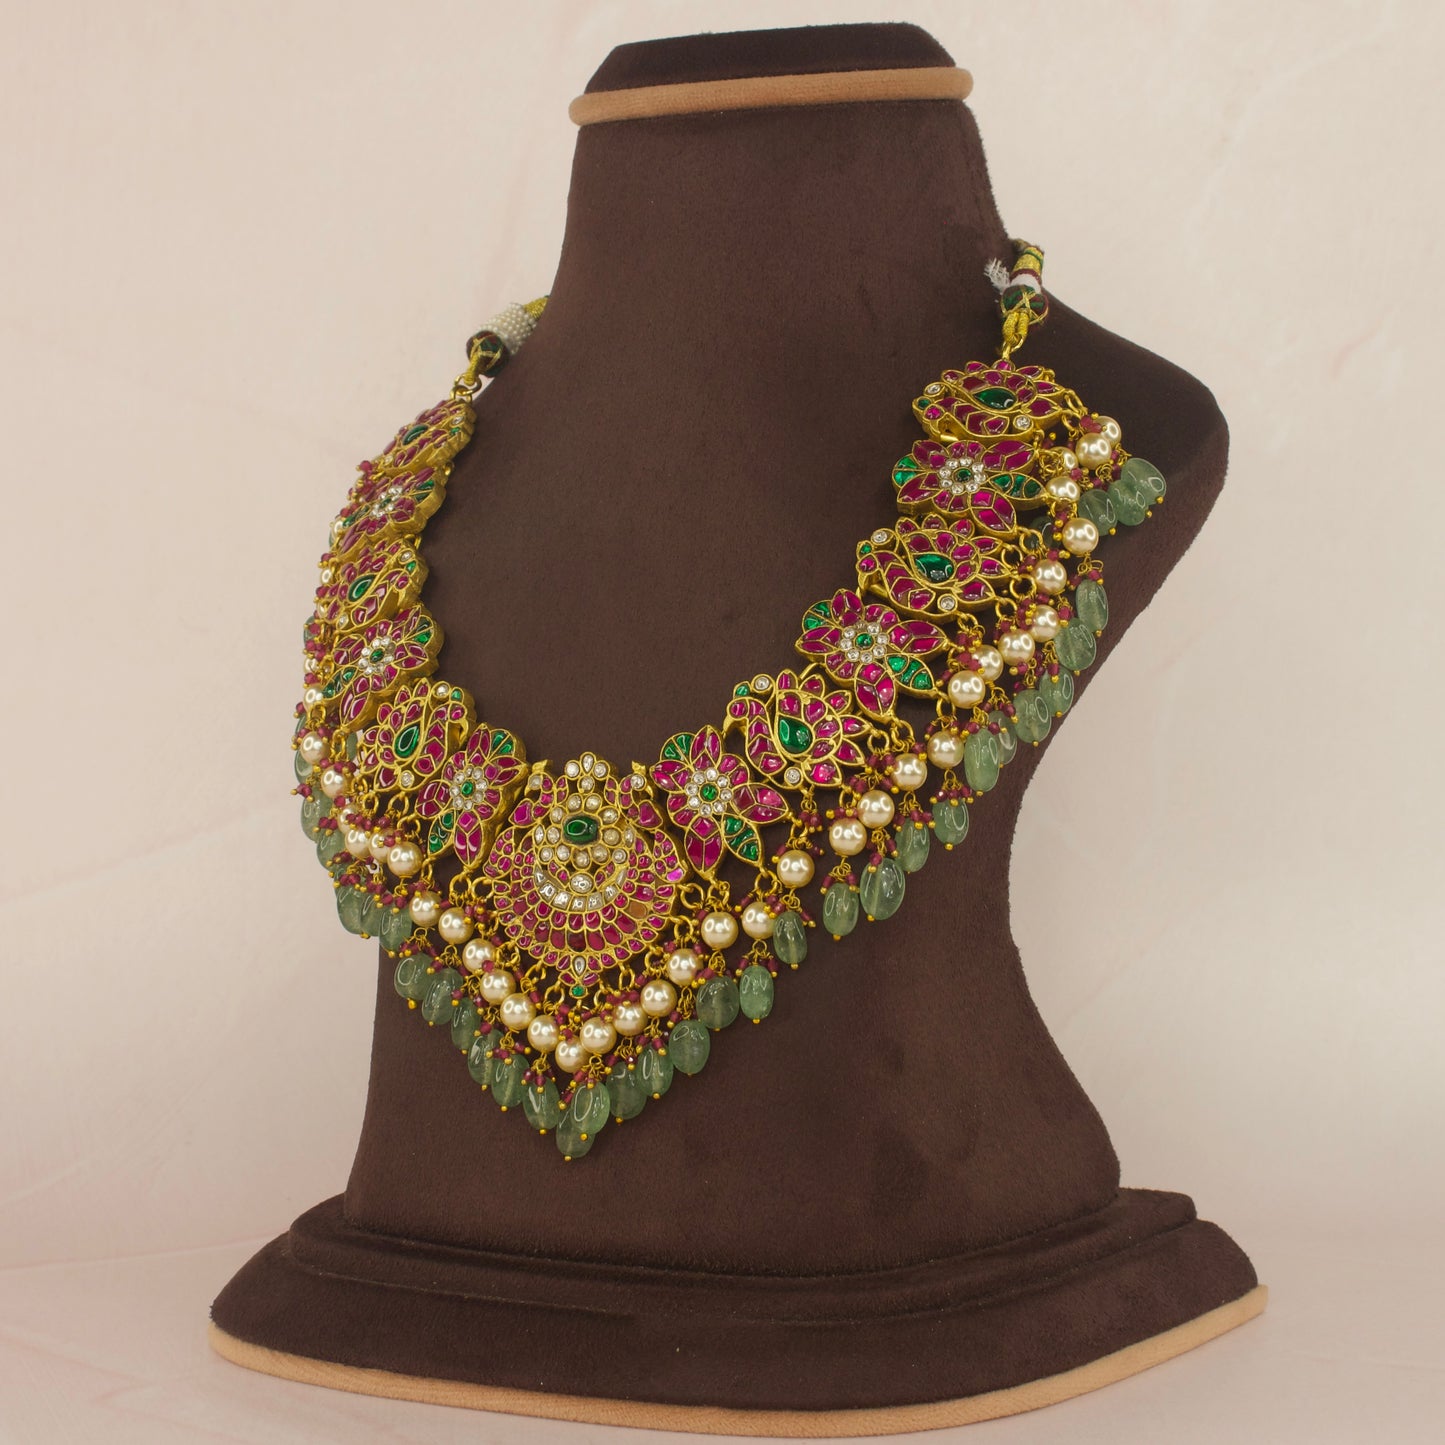 Majestic Jadau Kundan Necklace with Floral Motifs and Bead Drops with 22k gold plating This product belongs to Jadau Kundan jewellery category 